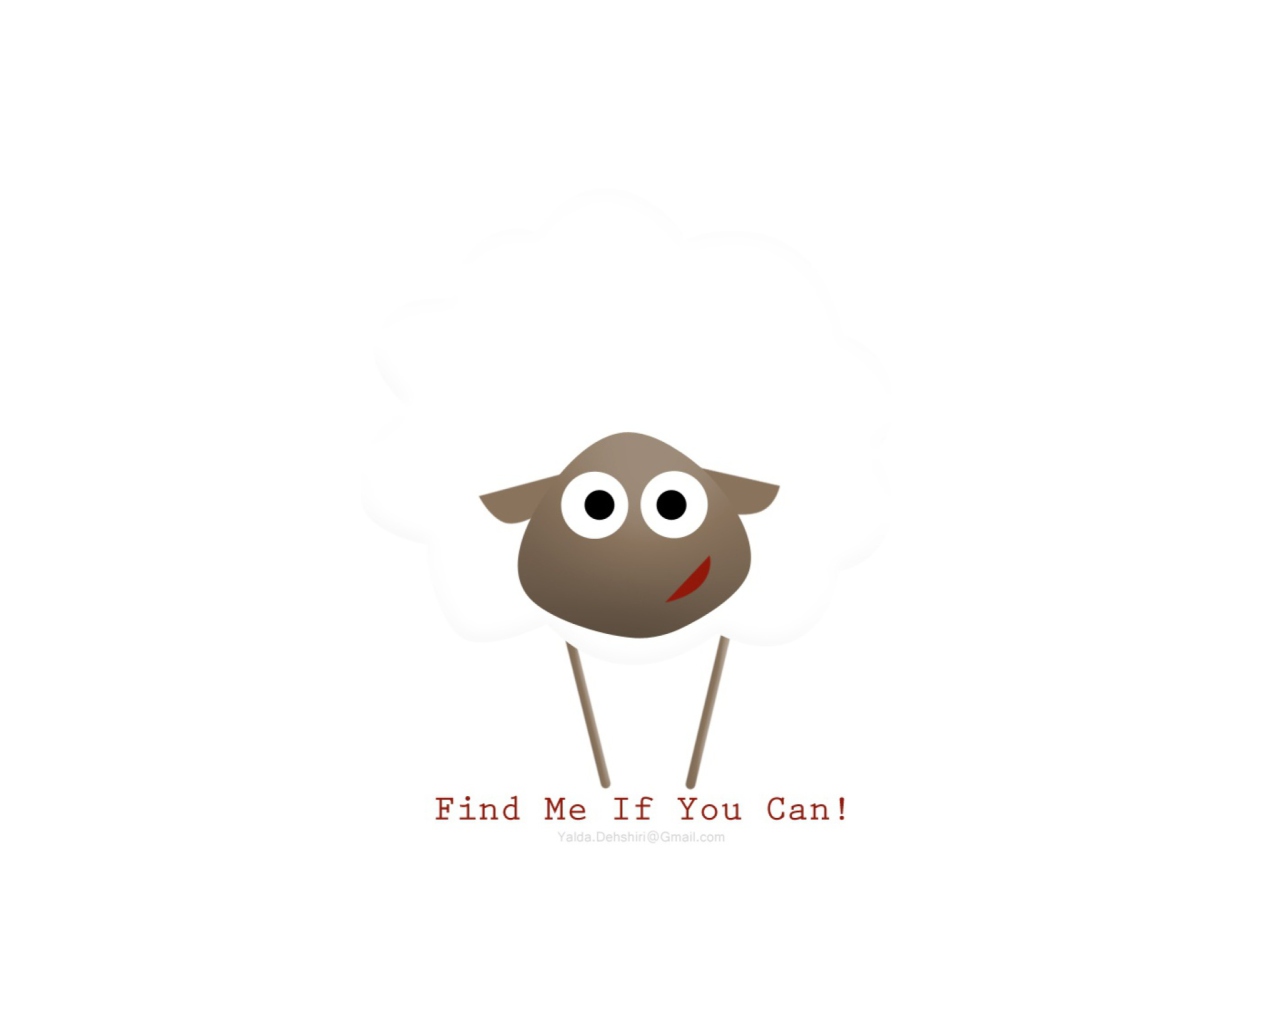 Das Find Me If You Can Wallpaper 1280x1024